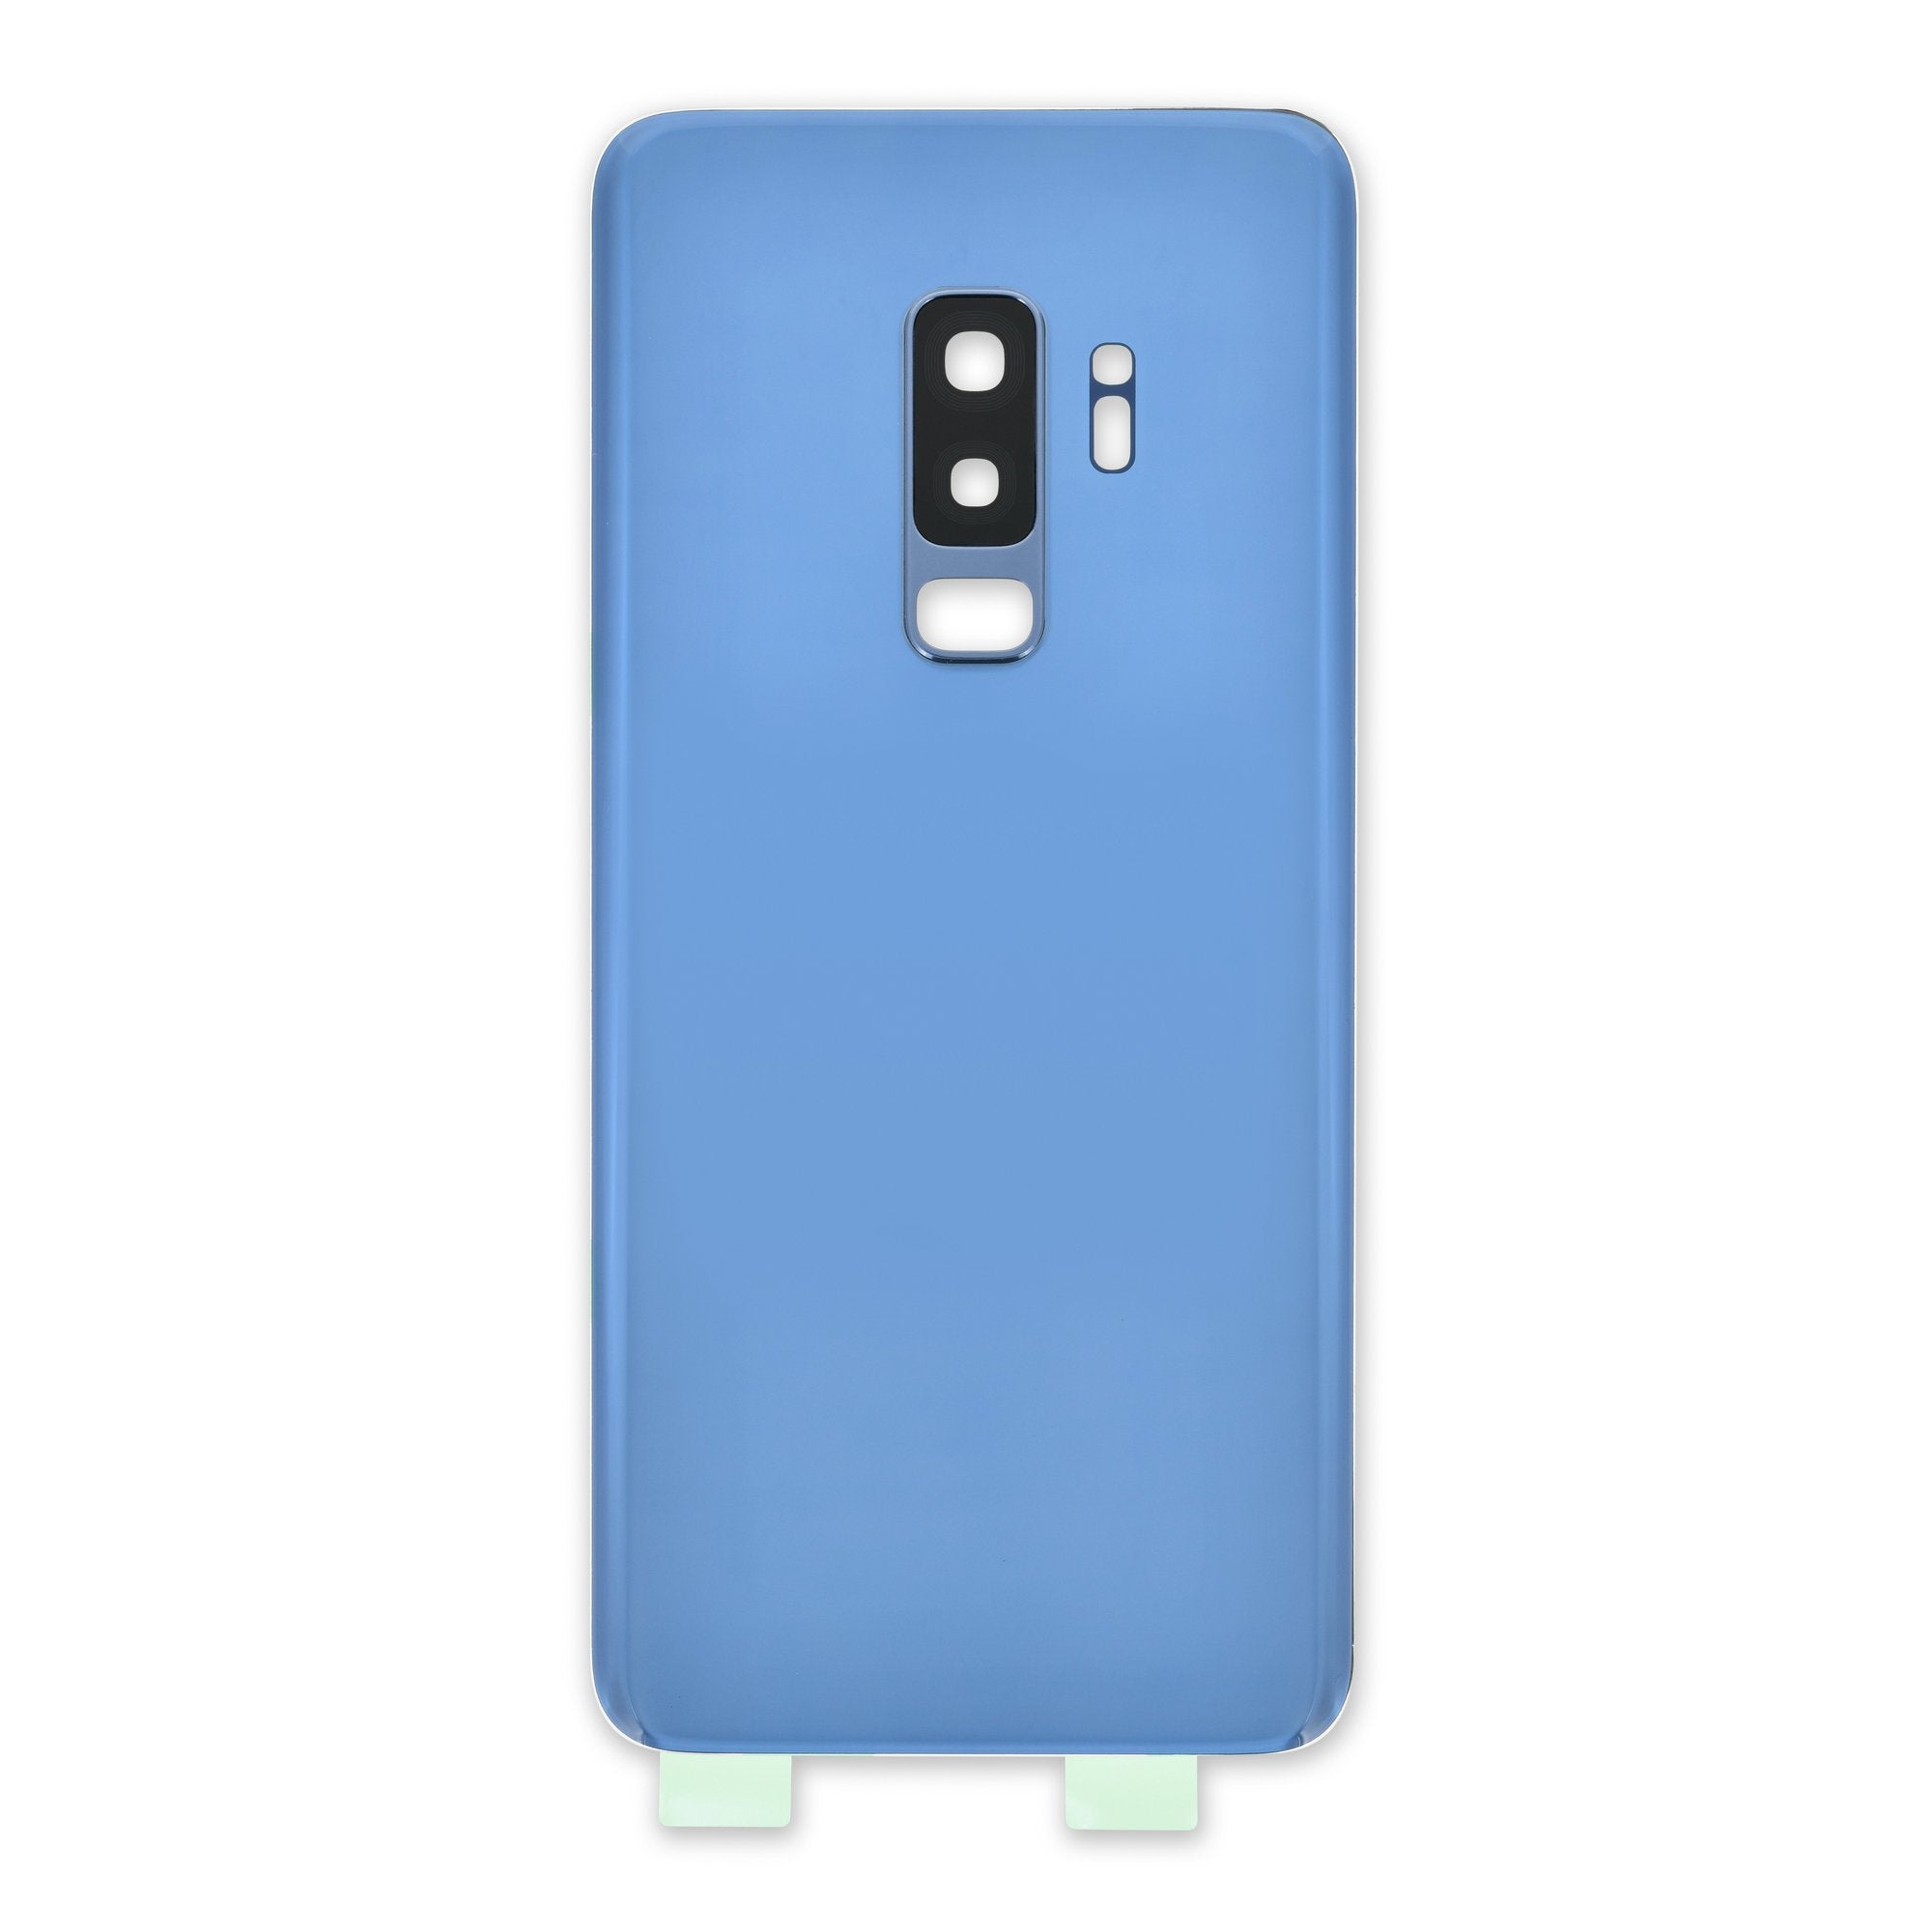 Galaxy S9+ Rear Glass Panel/Cover Blue New